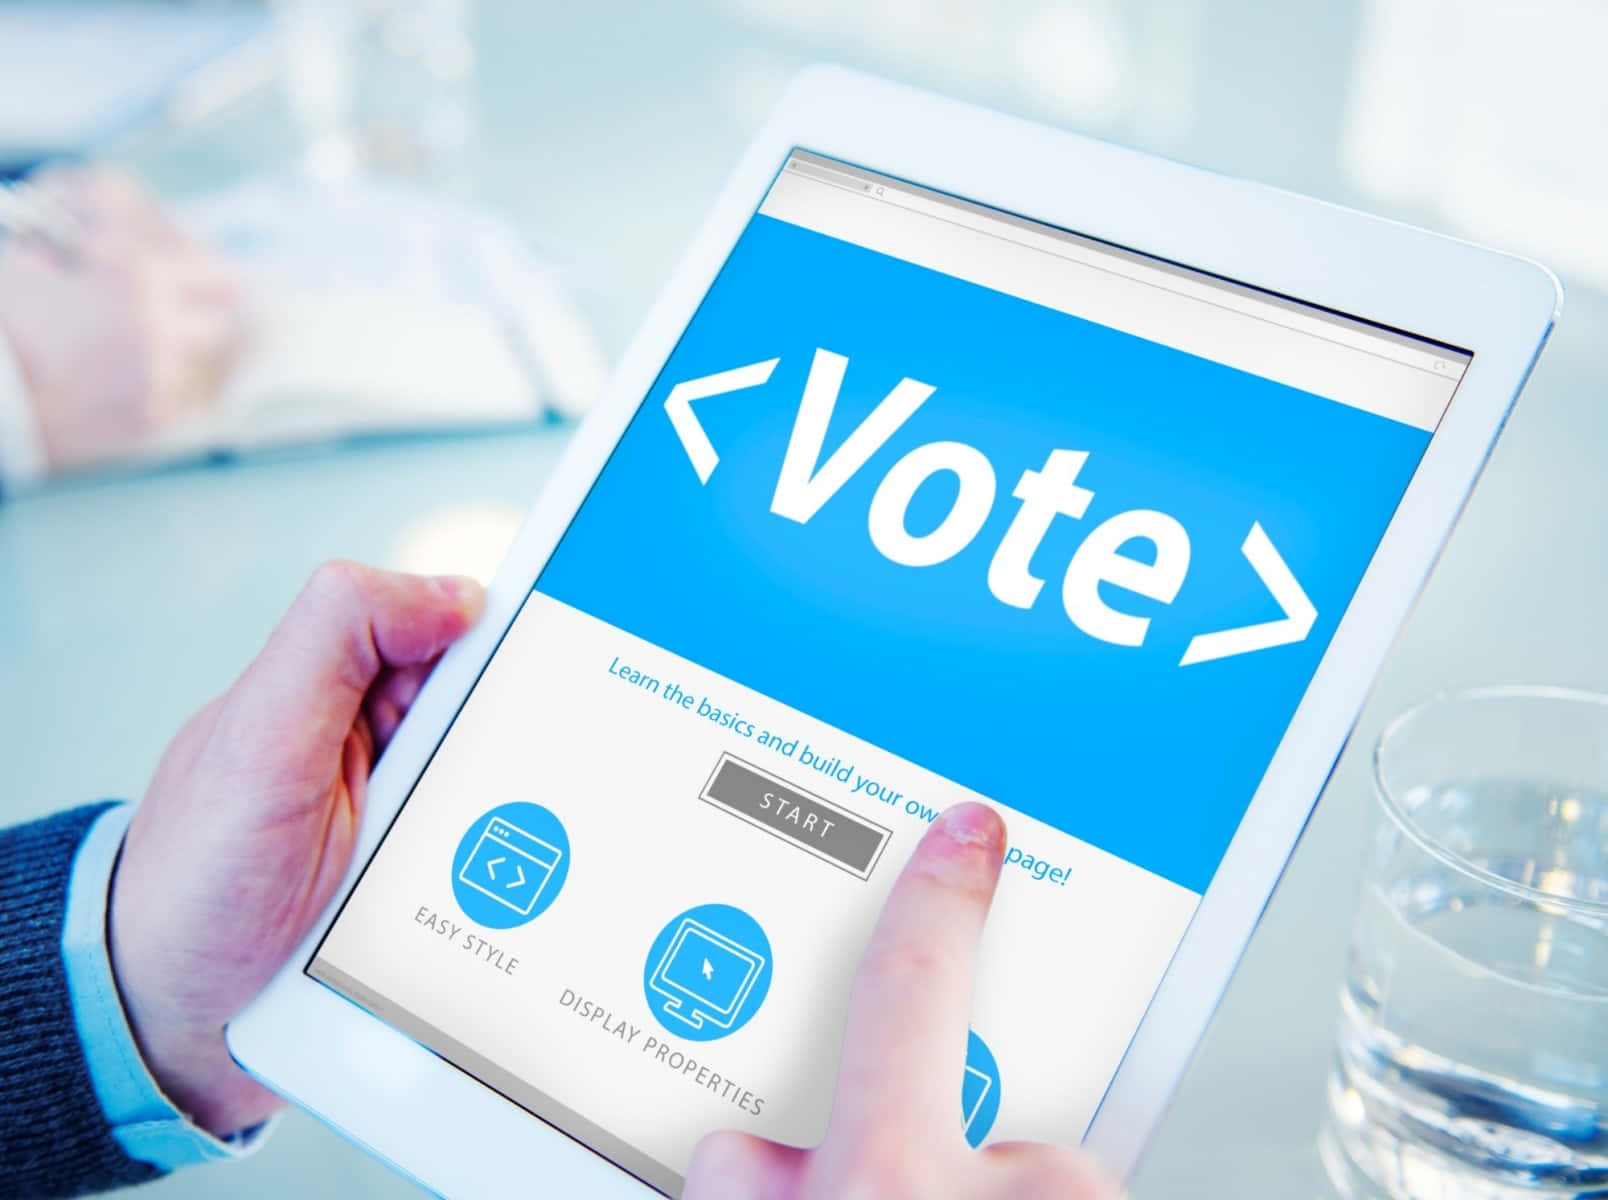 A Person Is Holding A Tablet With The Word Vote On It